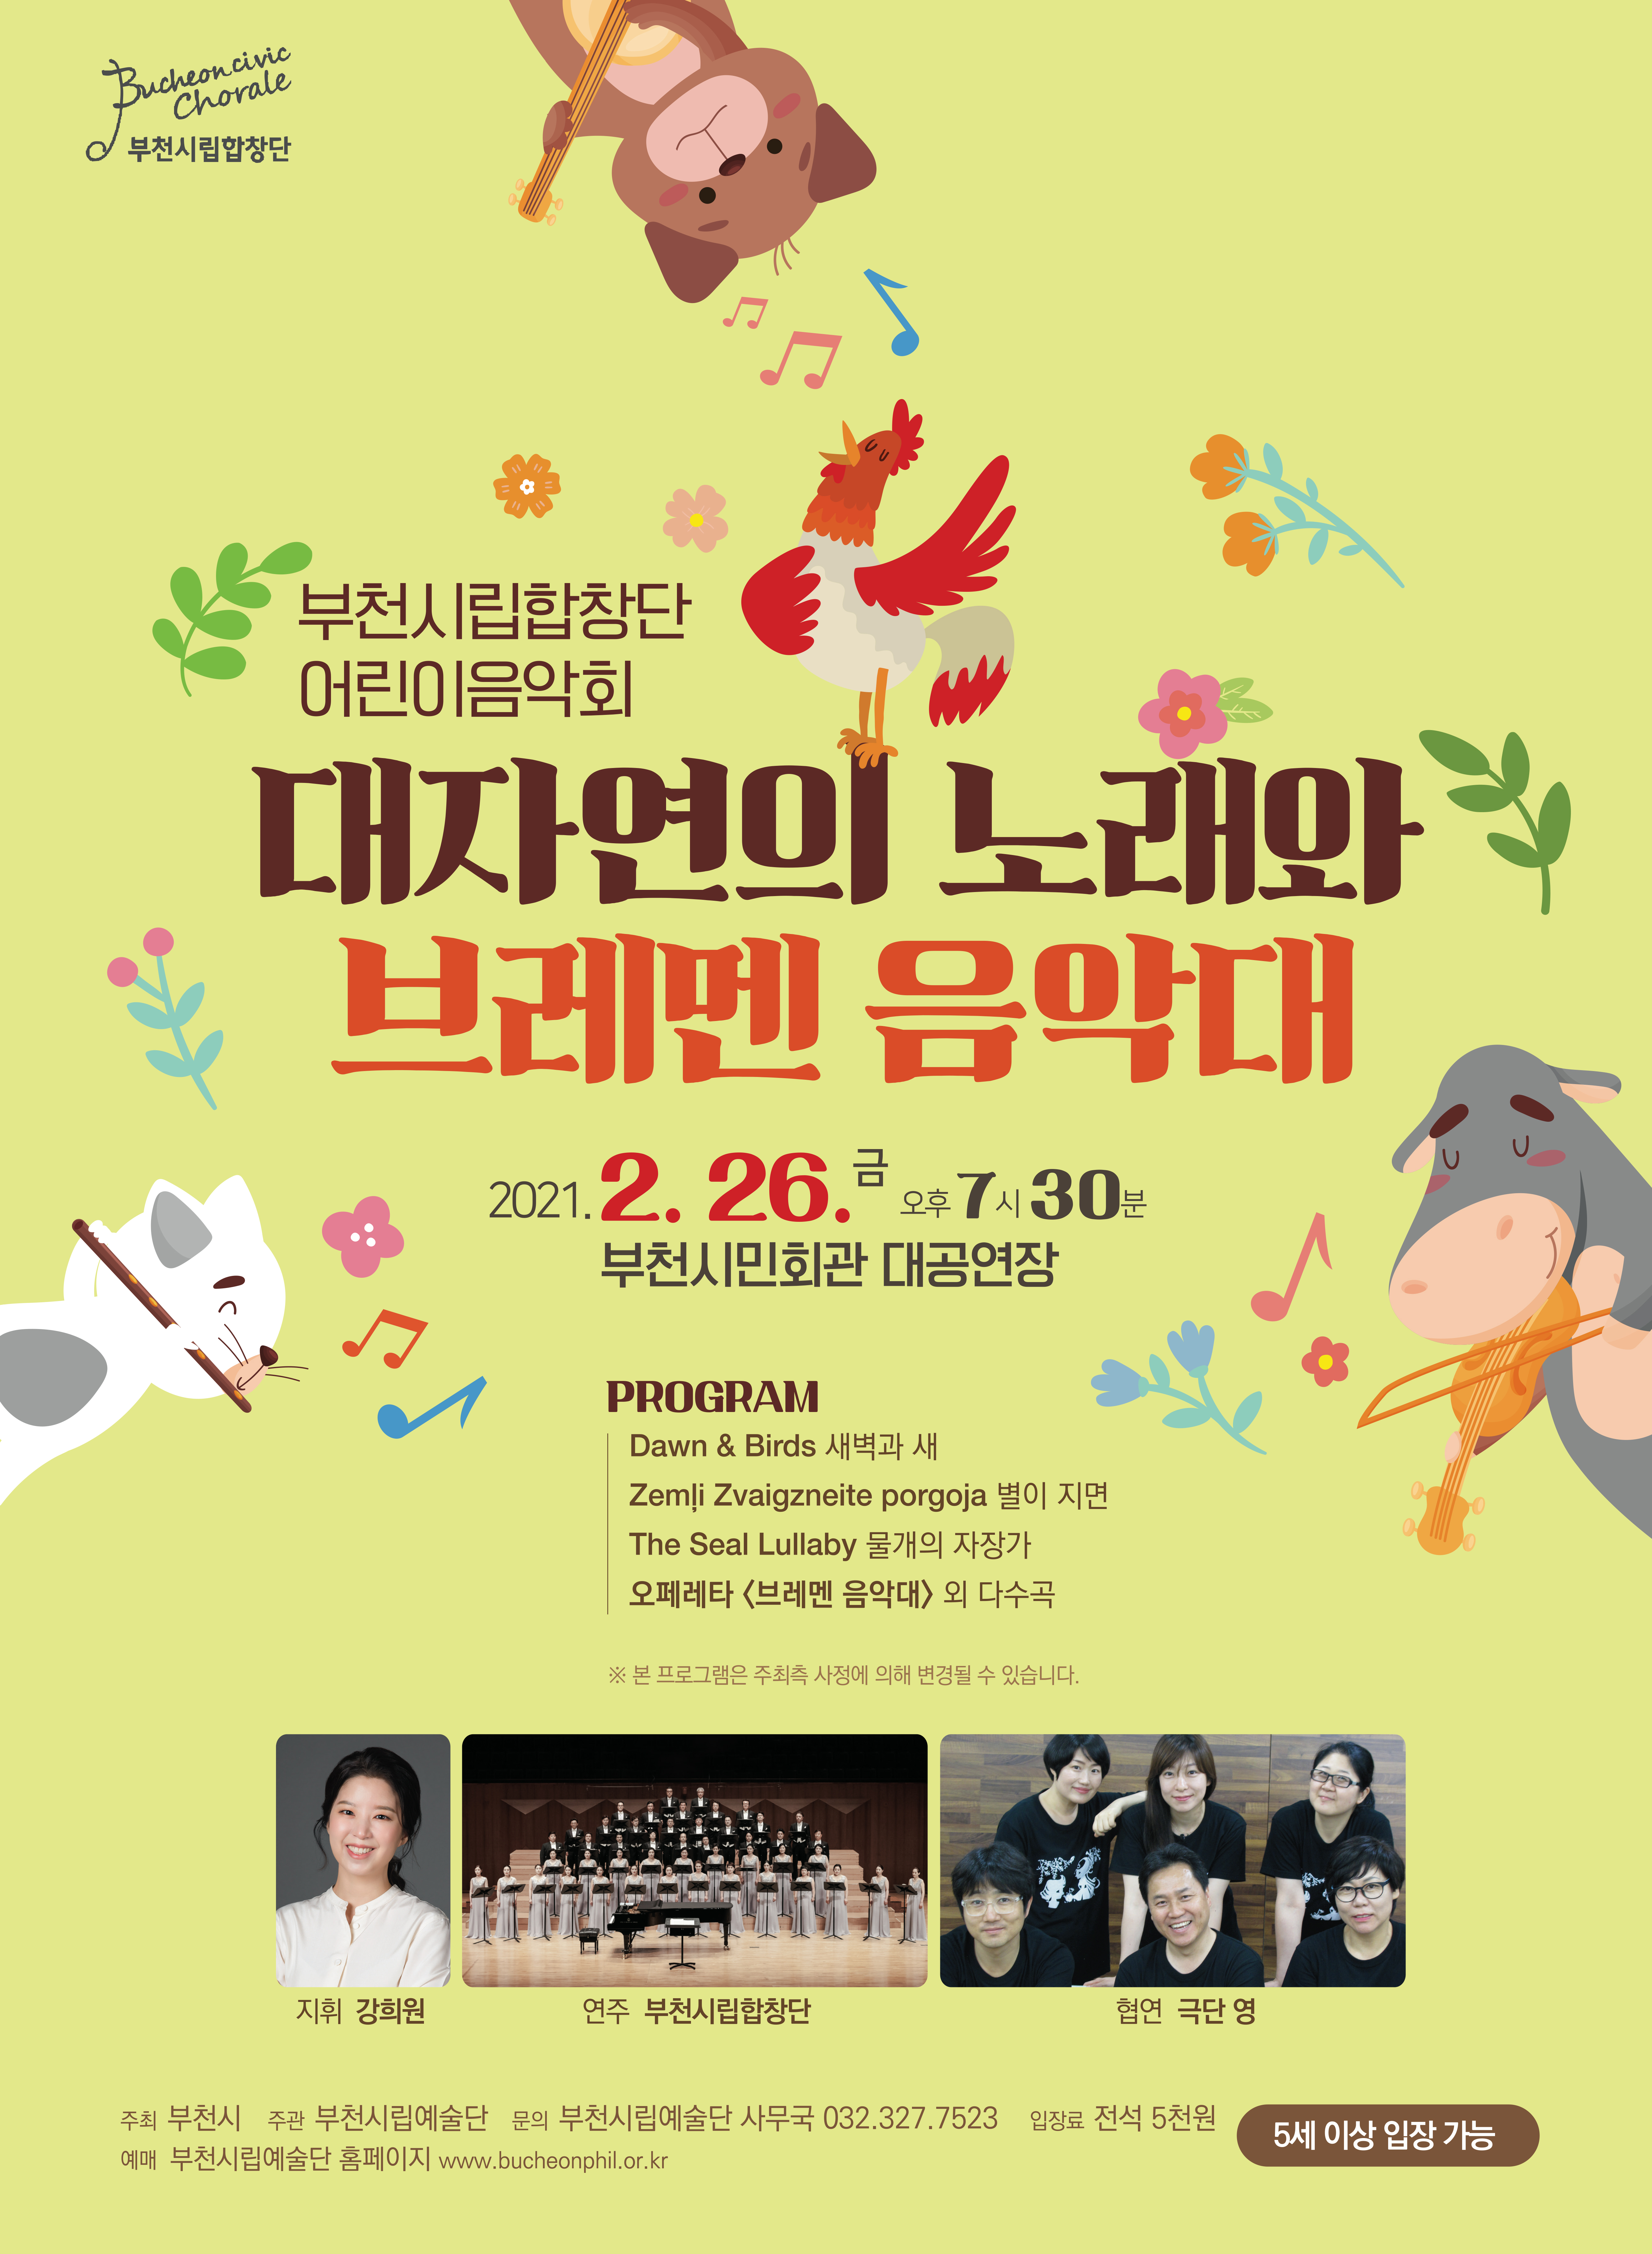 [2.26]Bucheon Civic Chorale Concert for c